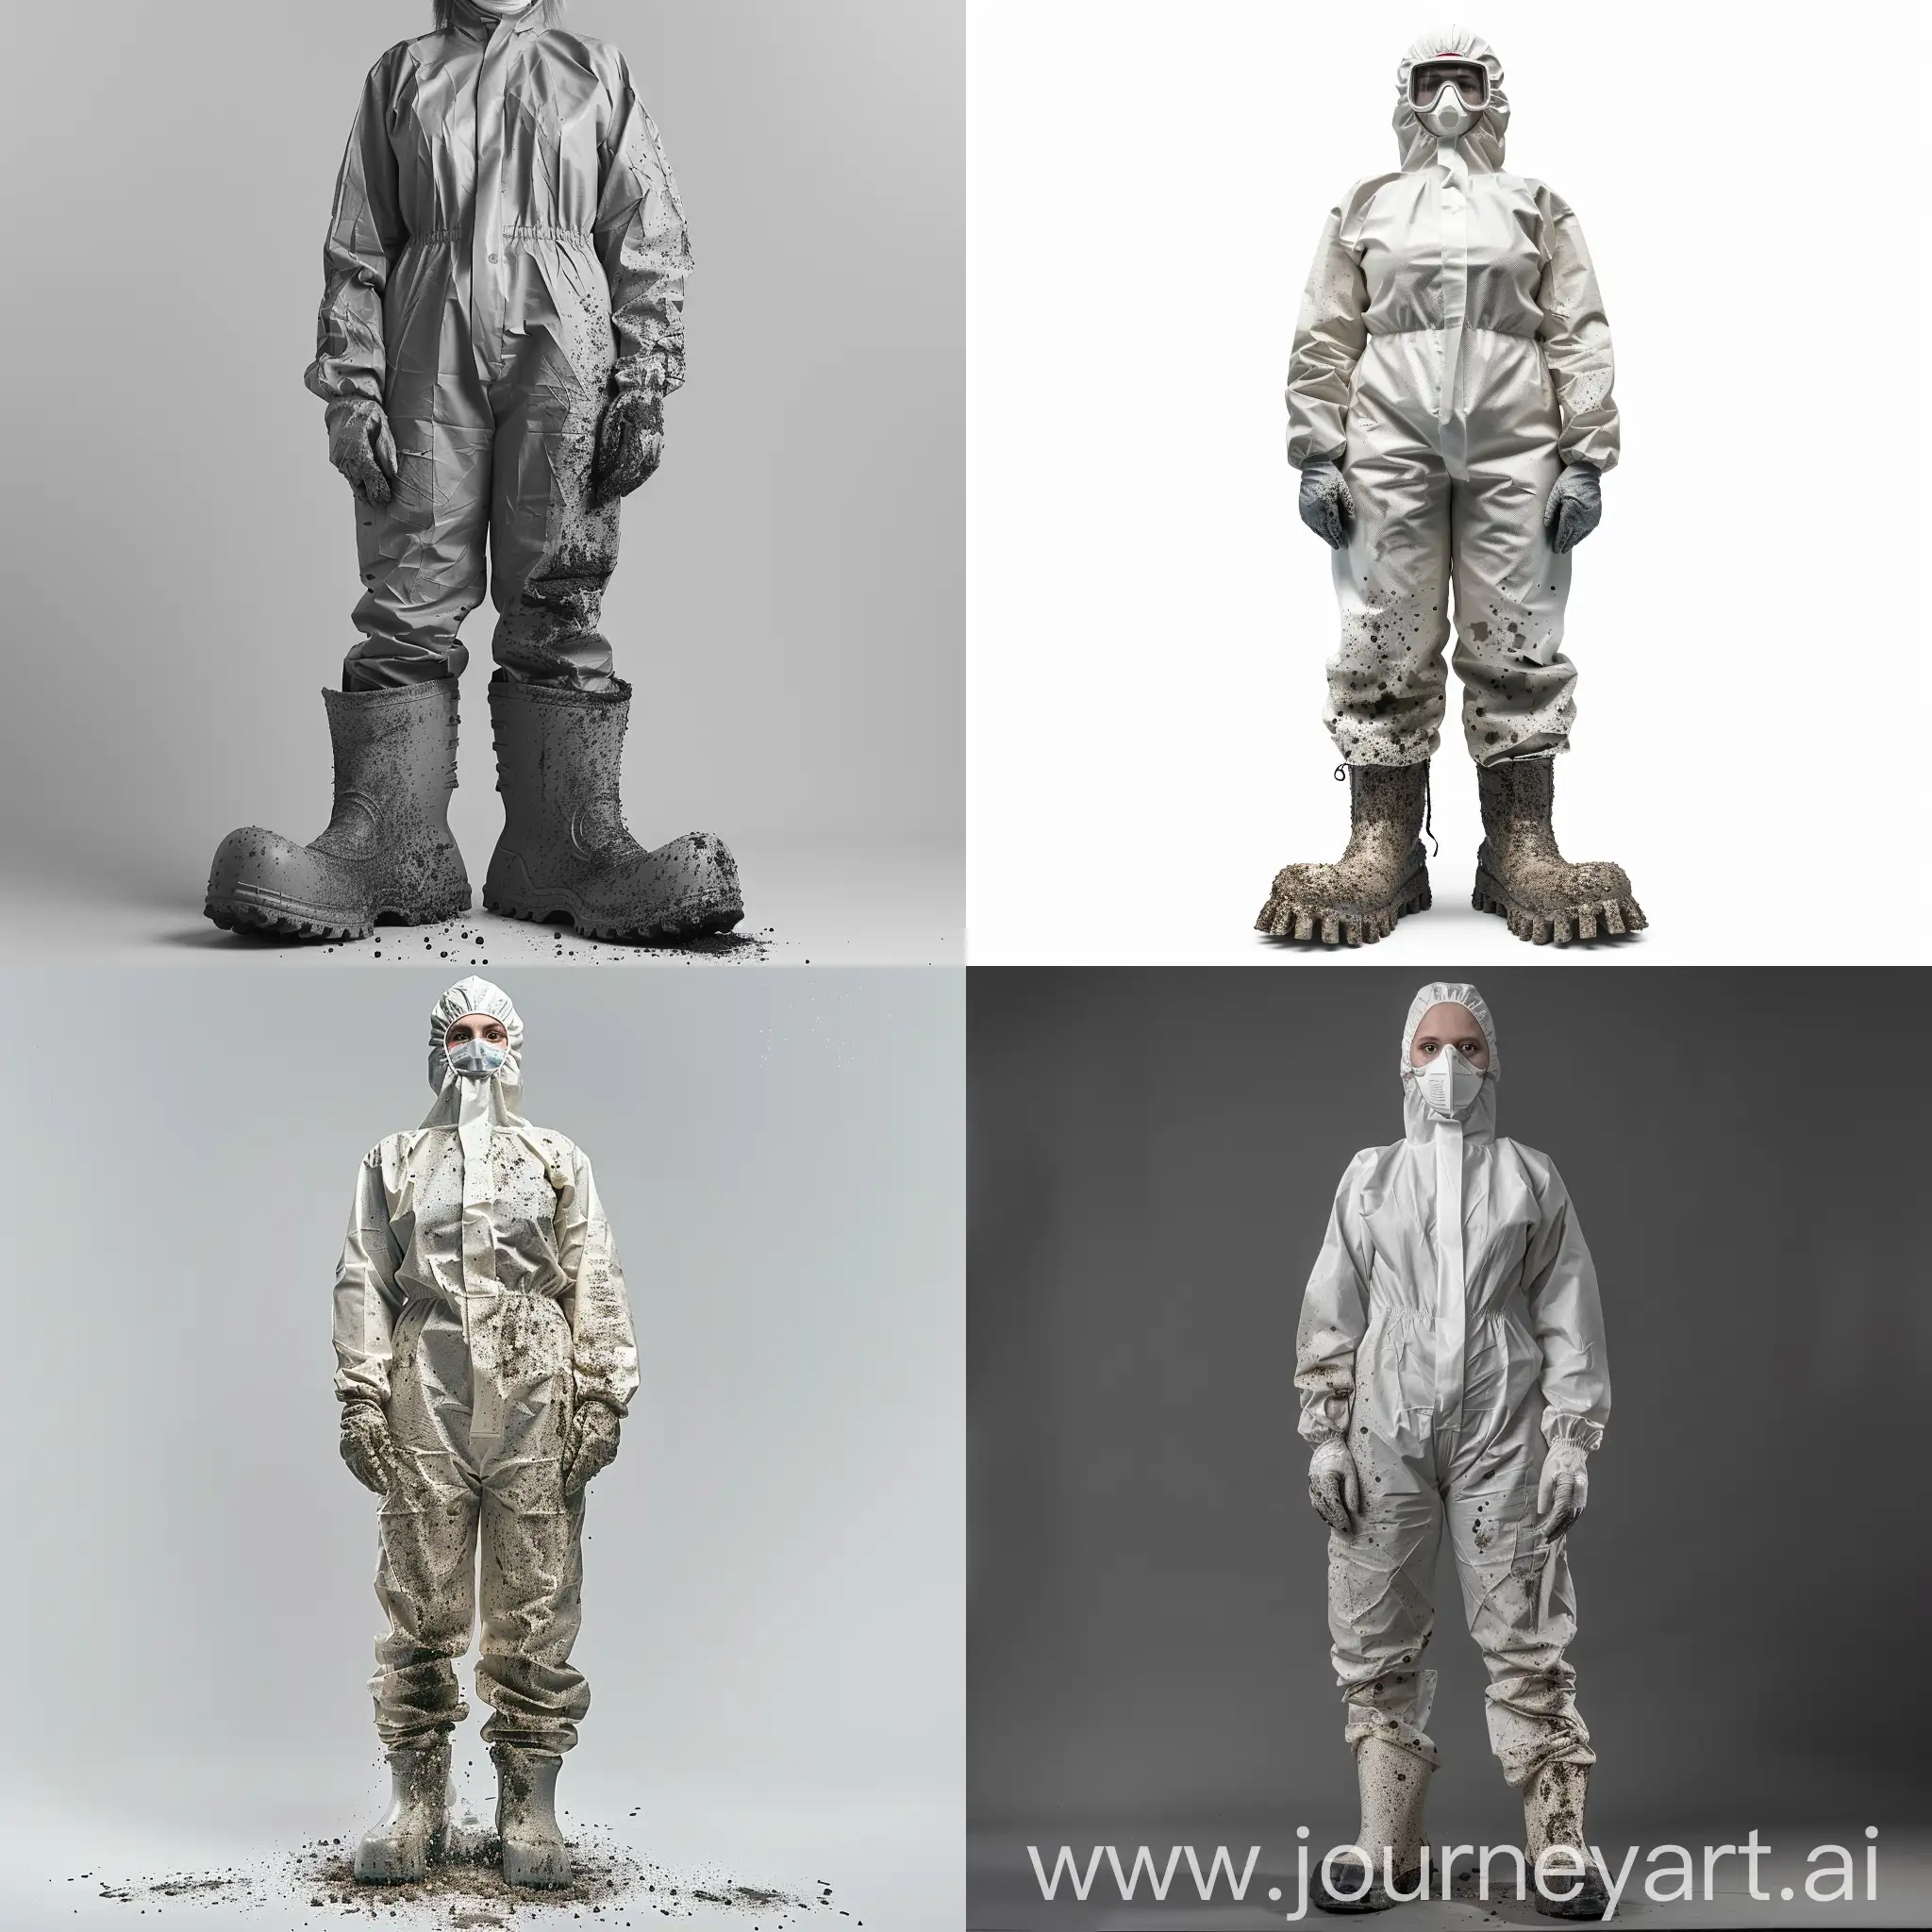 Woman-in-FullBody-Hazmat-Suit-with-Protective-Gear